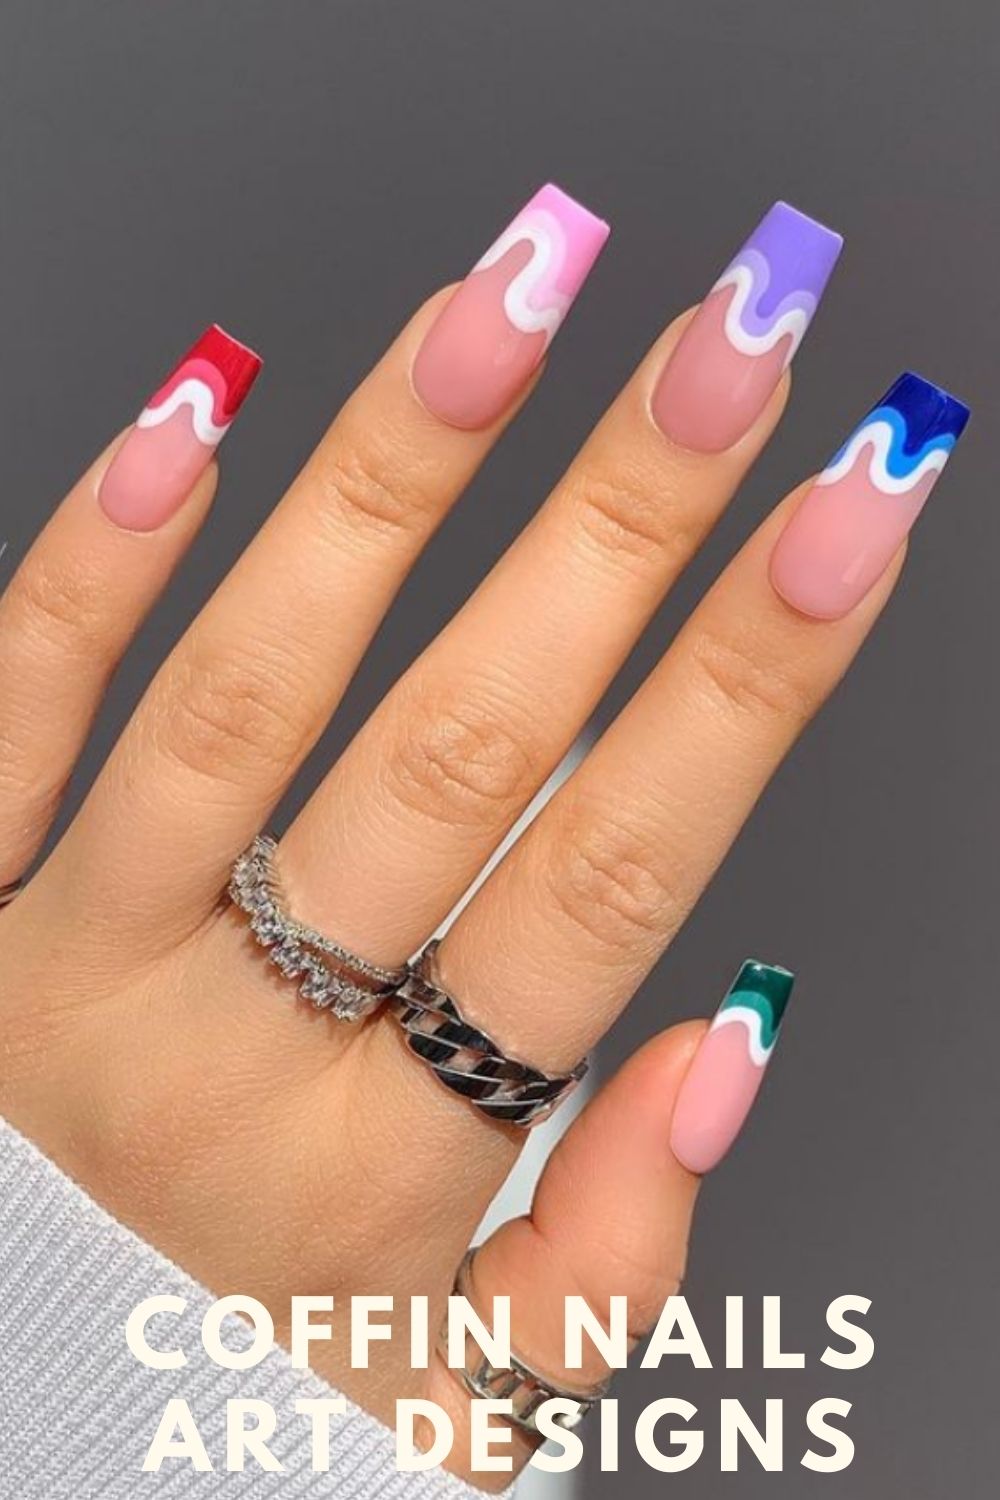 French nails designs